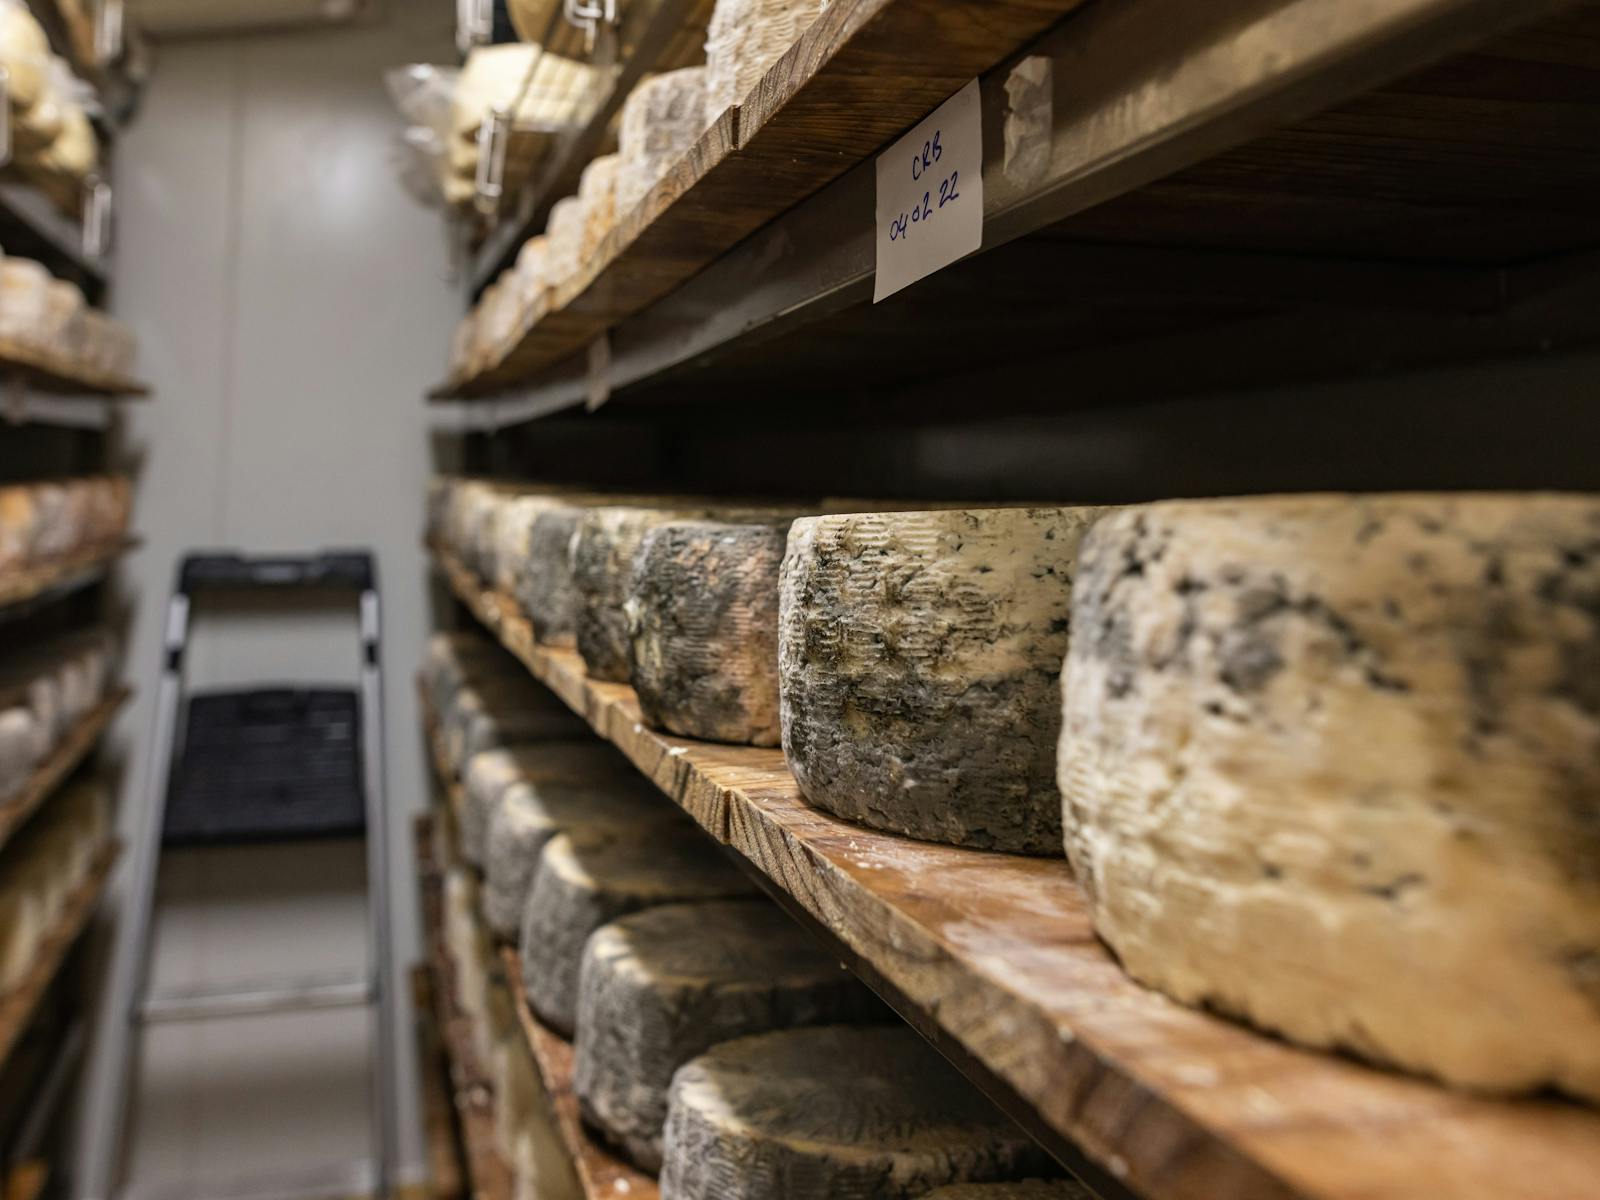 Cheese maturing on shelves